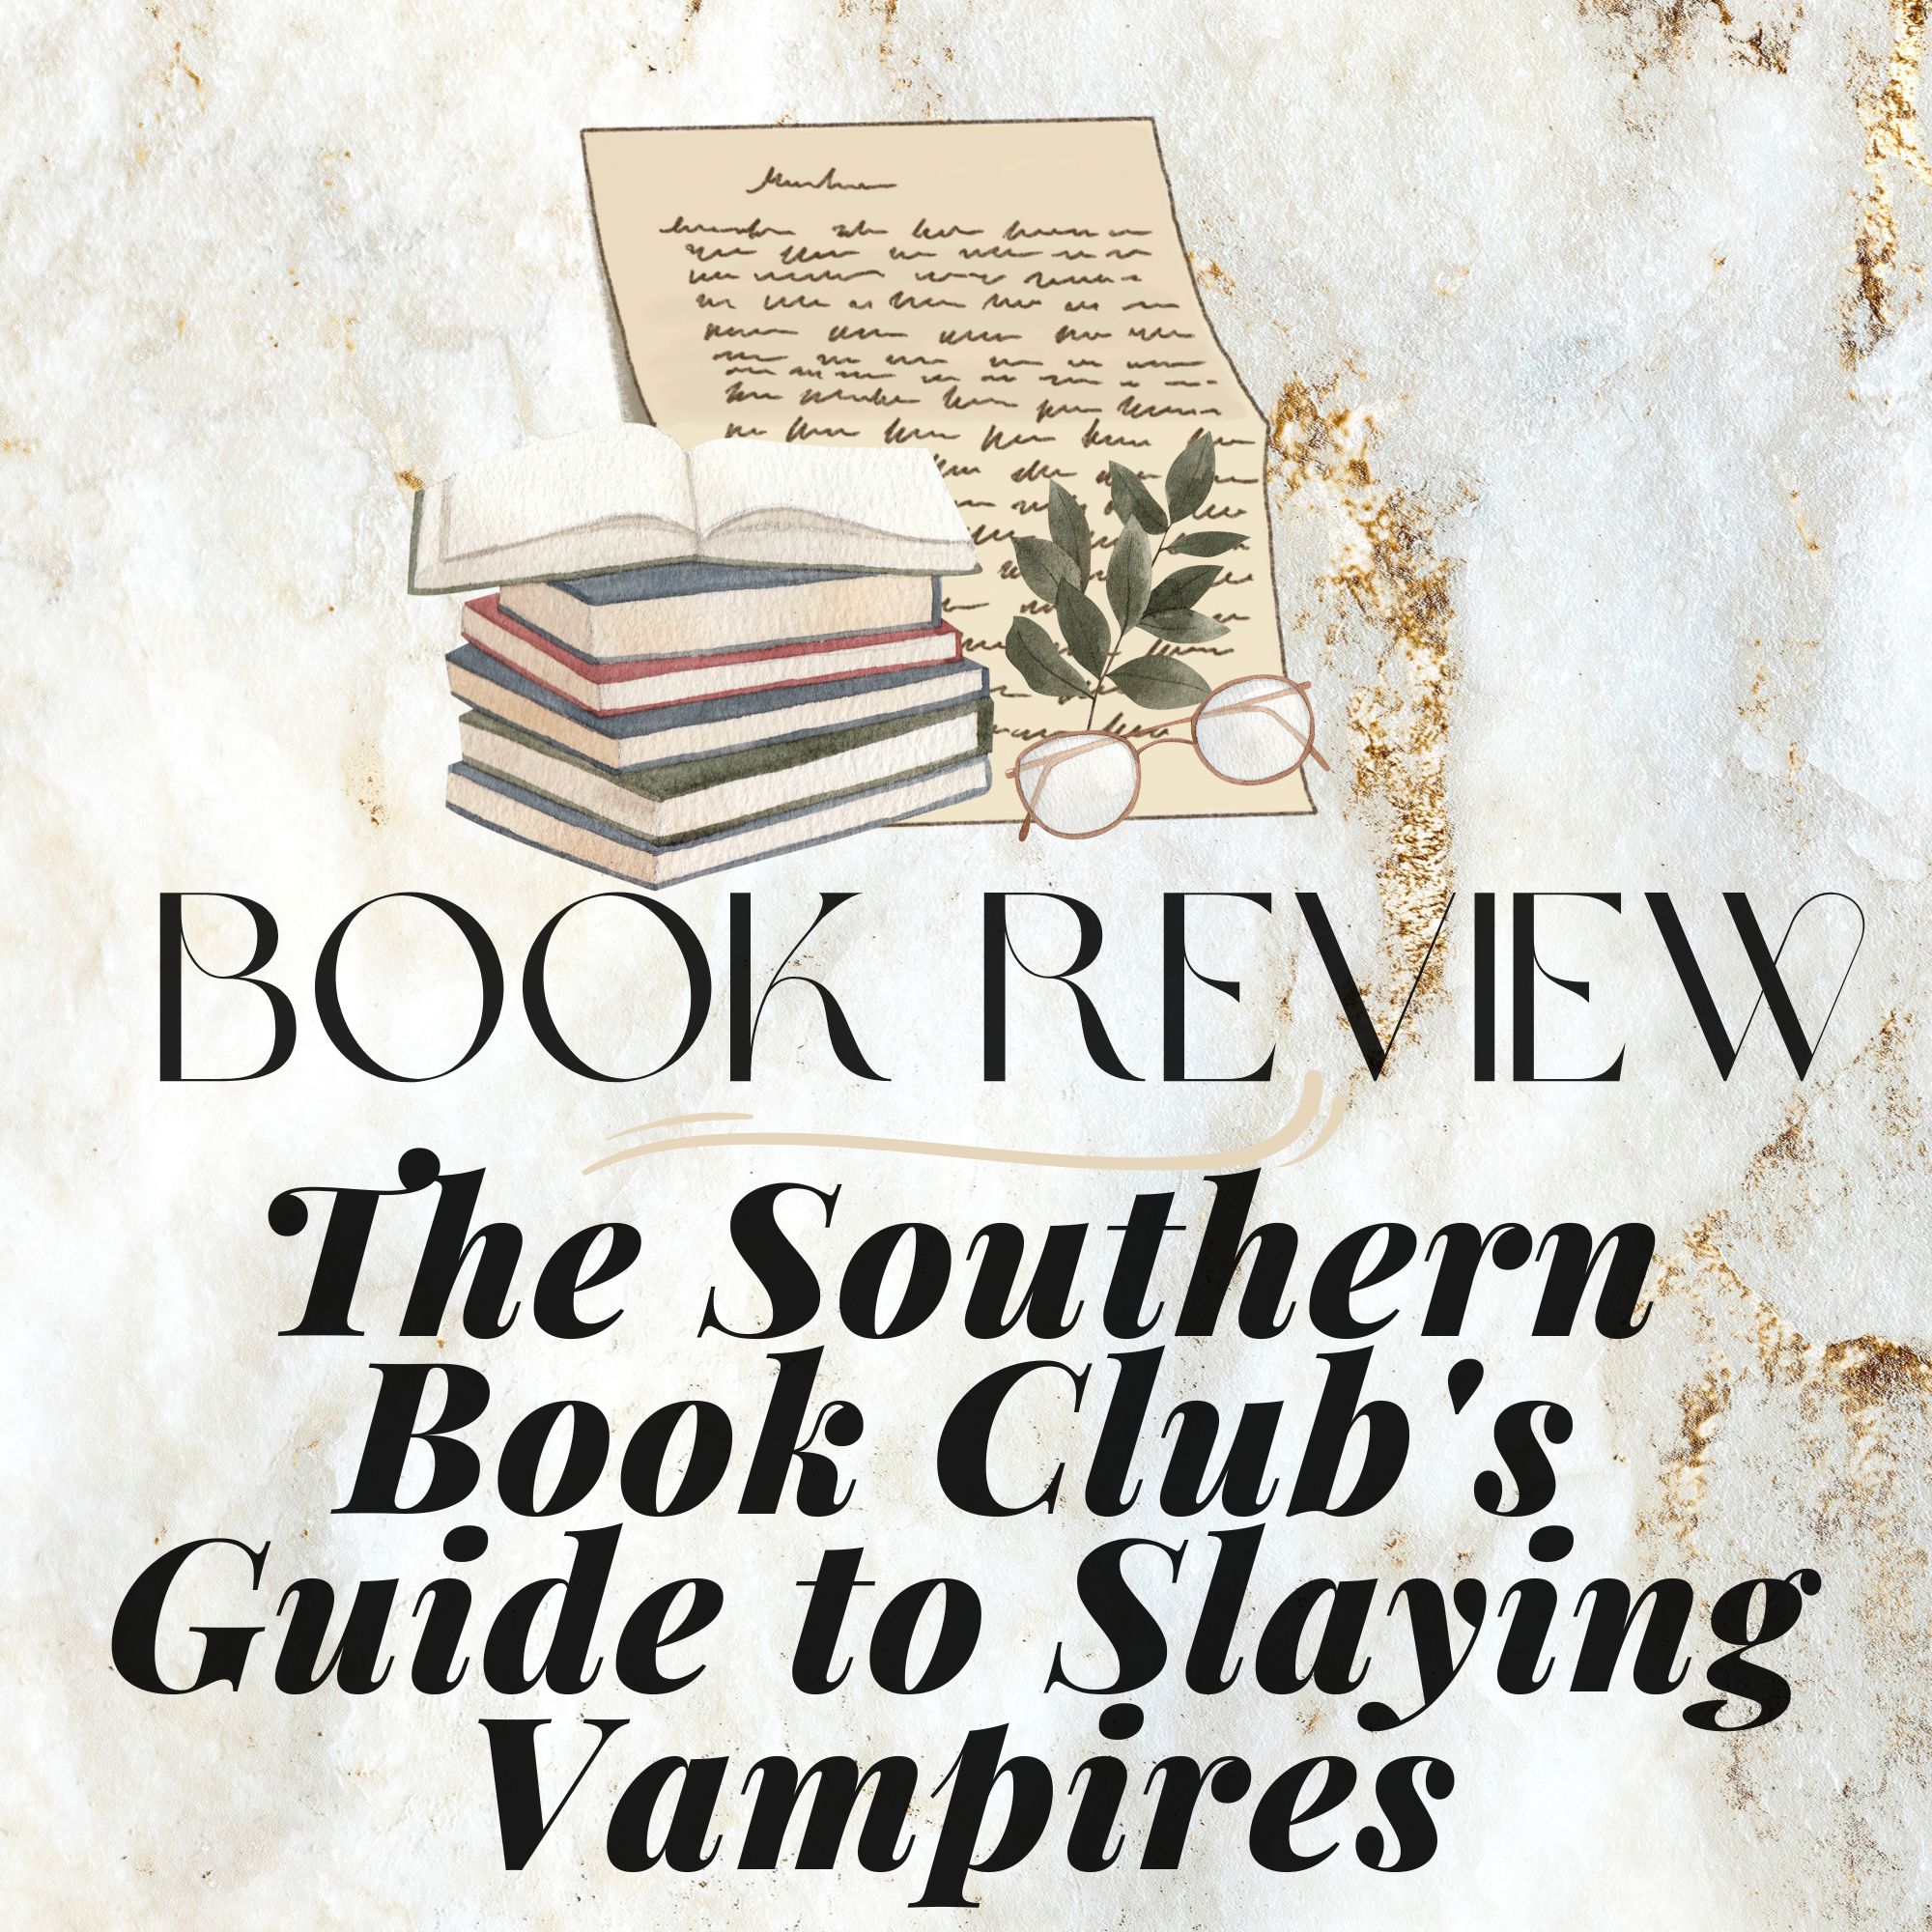 Good Reads Challenge:  The Southern Book Club’s Guide to Slaying Vampires